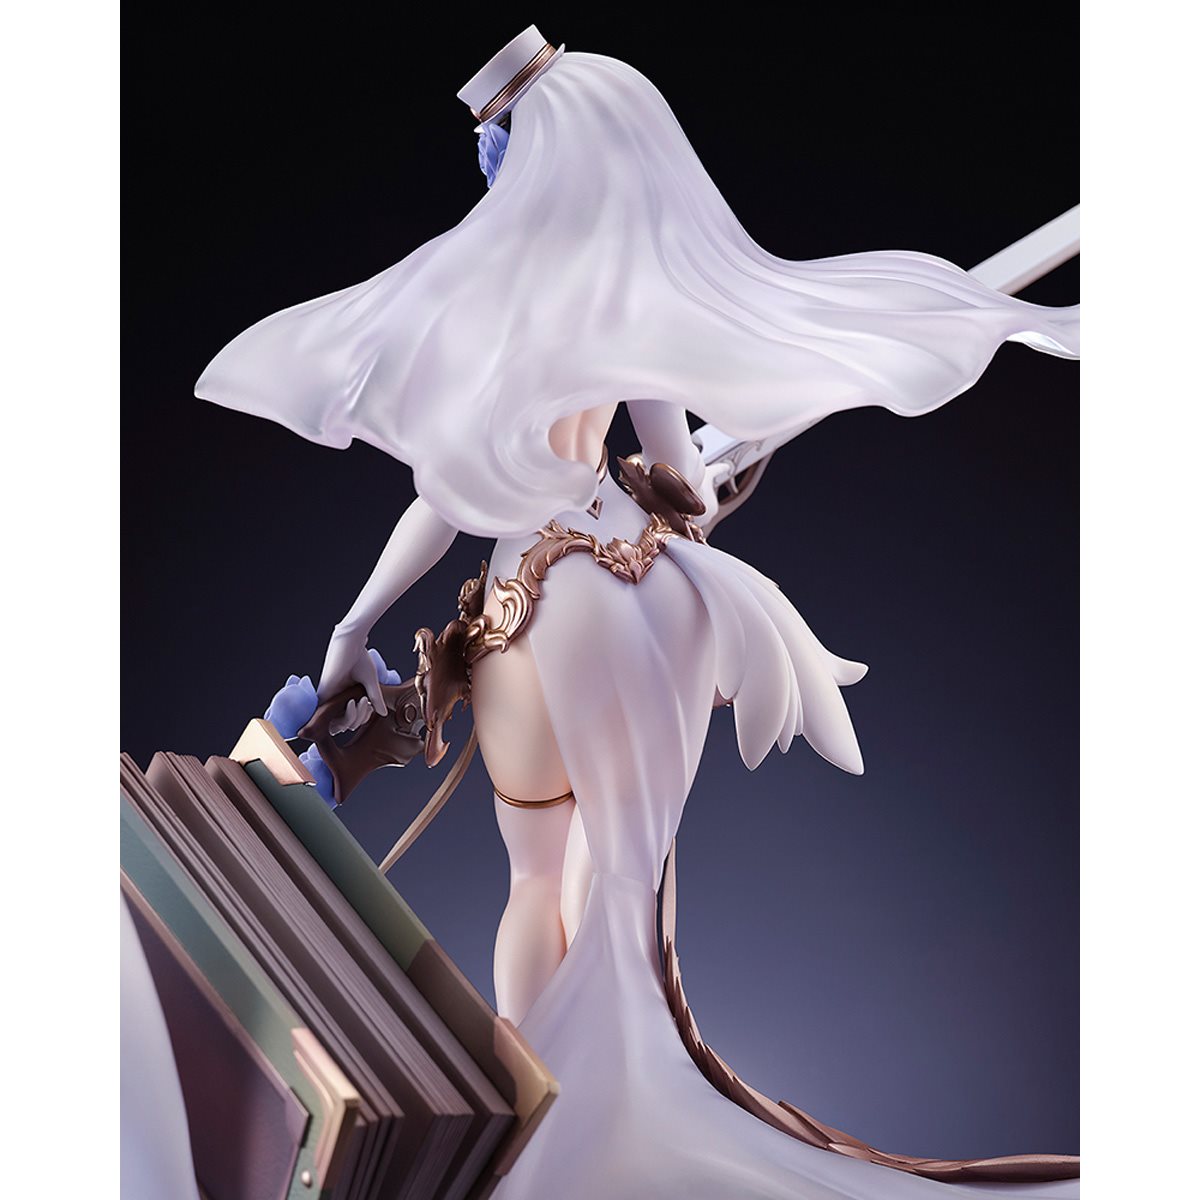 Hot Game Ranni The Witch PVC Figure Model Anime Game Collection Toy Gift